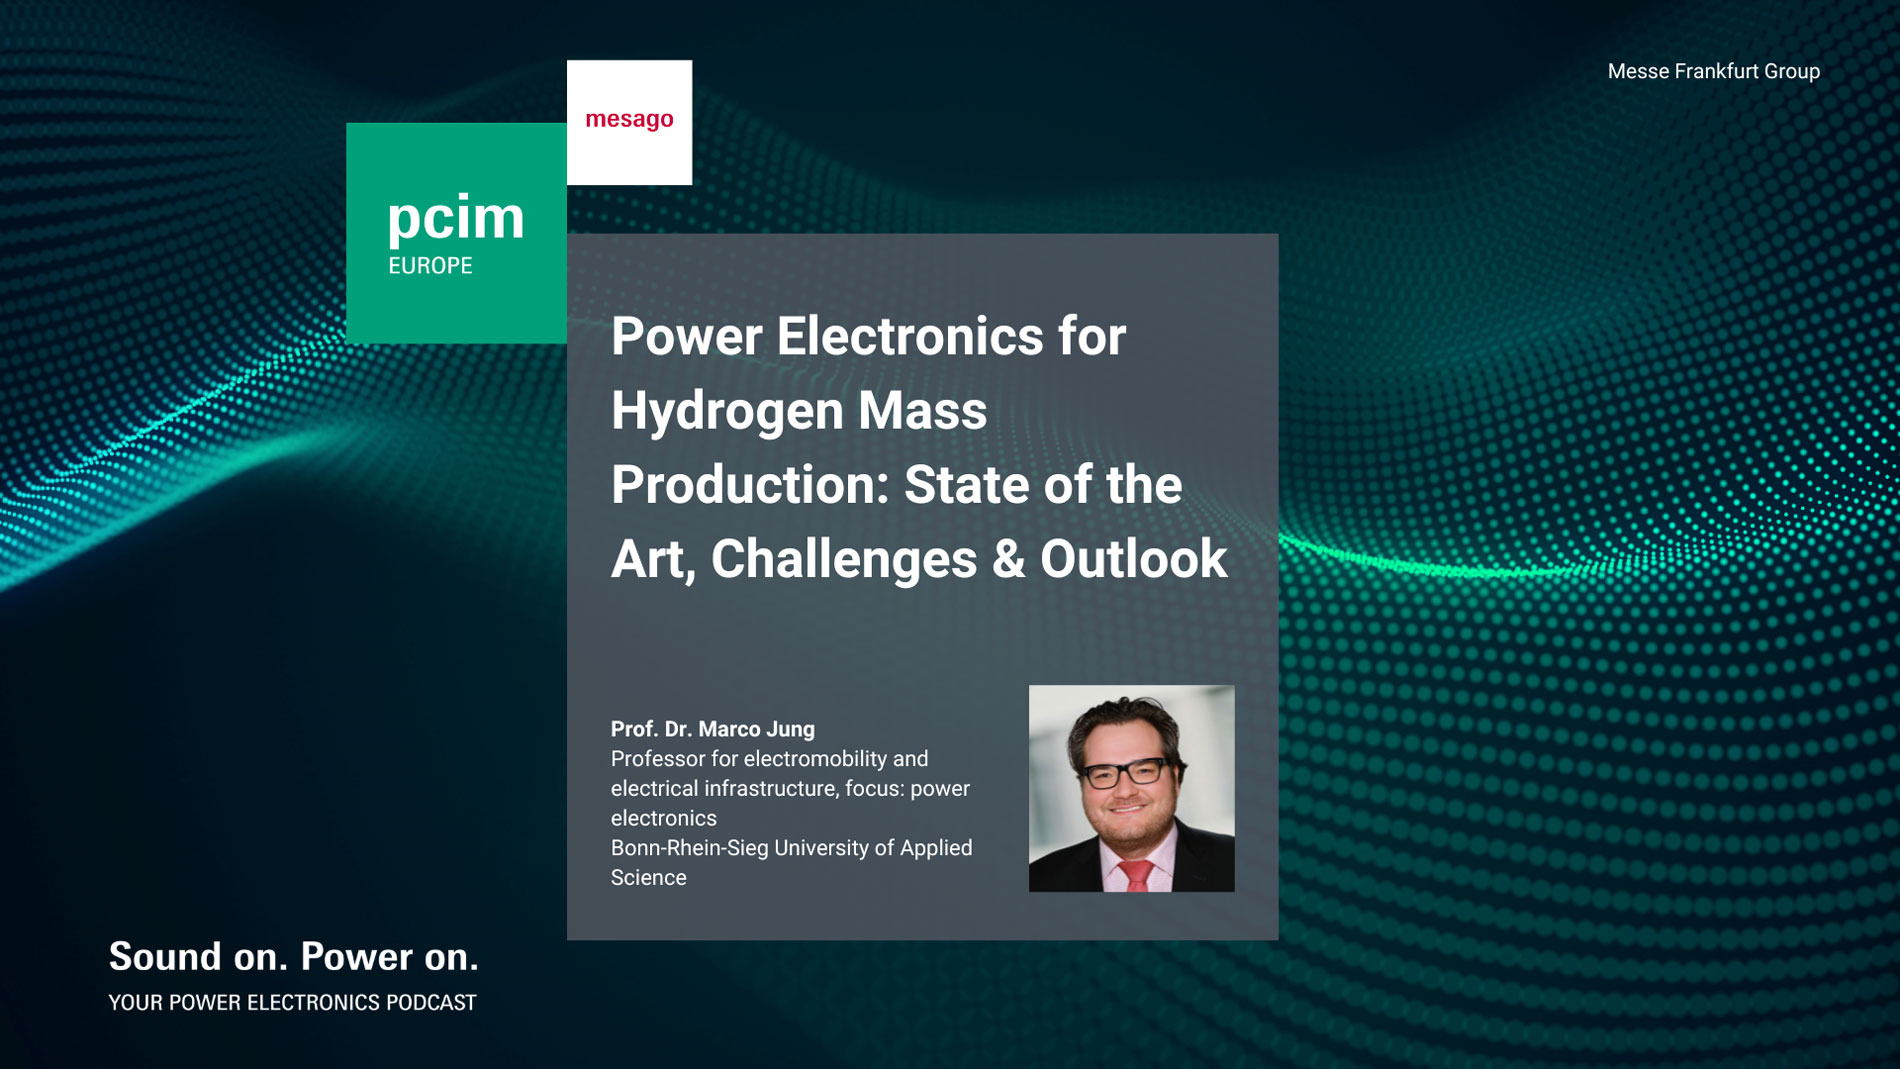 Prof. Dr. Marco Jung of the Bonn-Rhein-Sieg University of Applied Science on Power Electronics for Hydrogen Mass Production